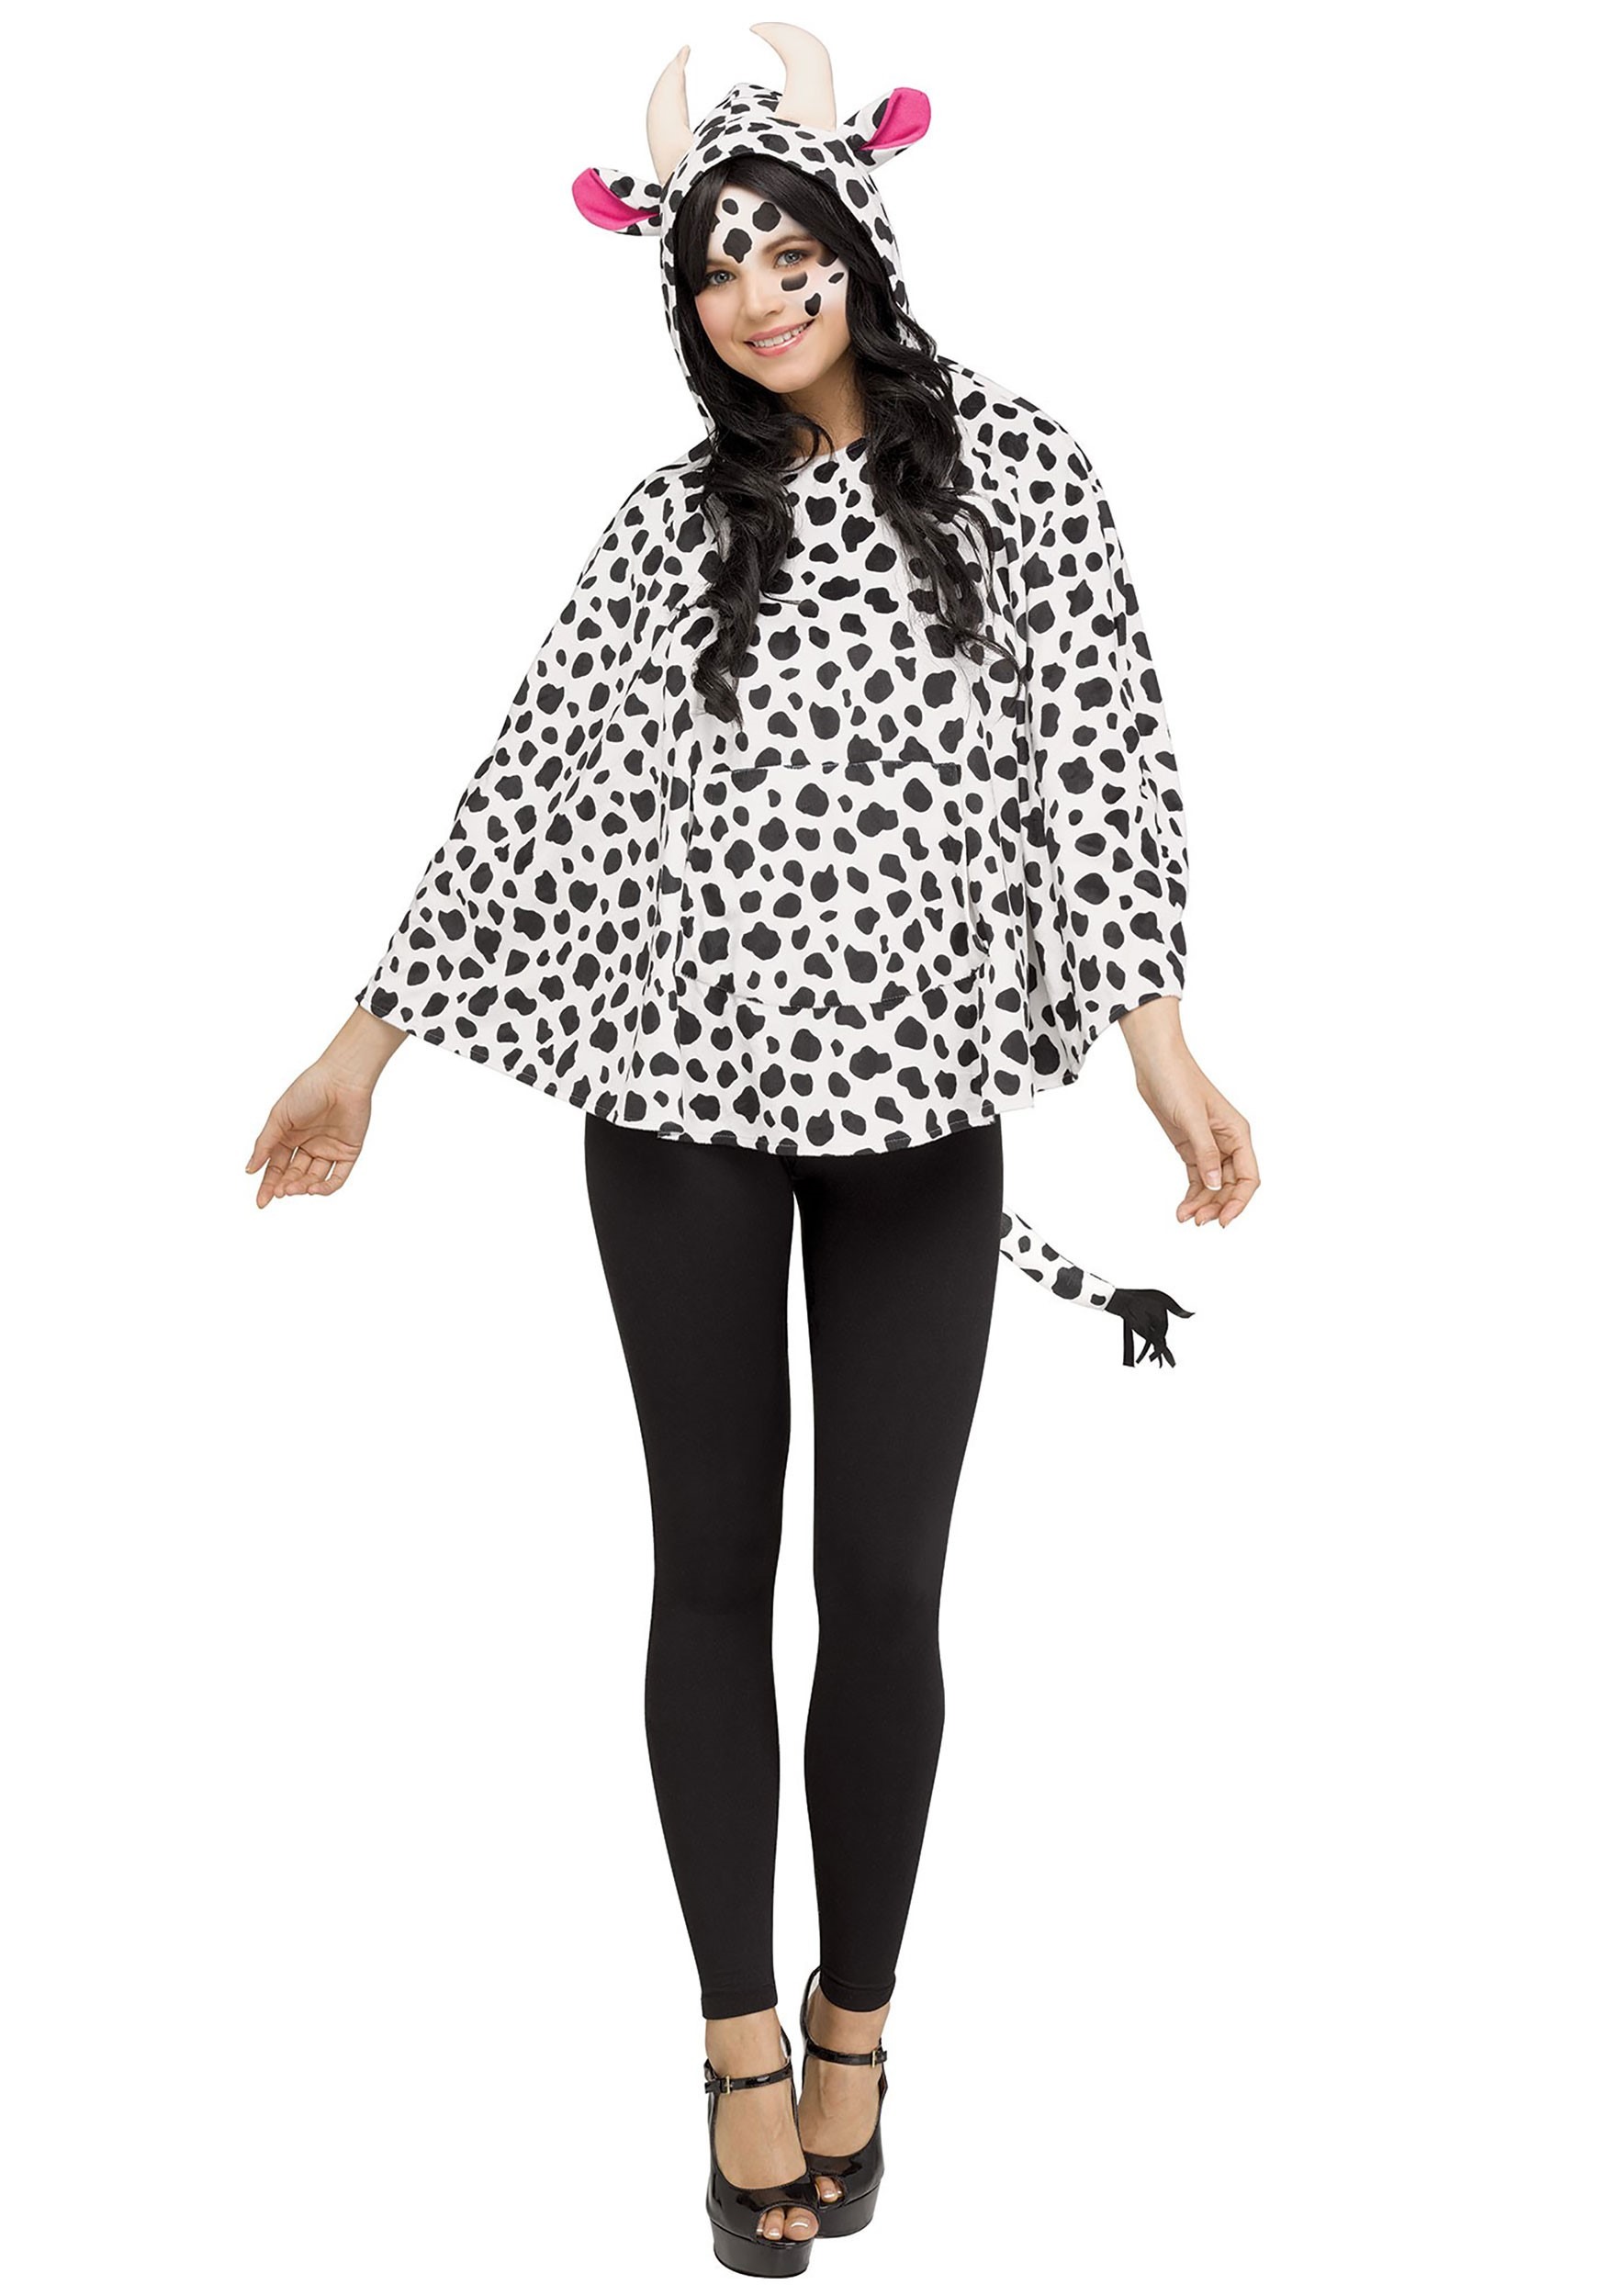 Women’s Cow Hooded Poncho Costume